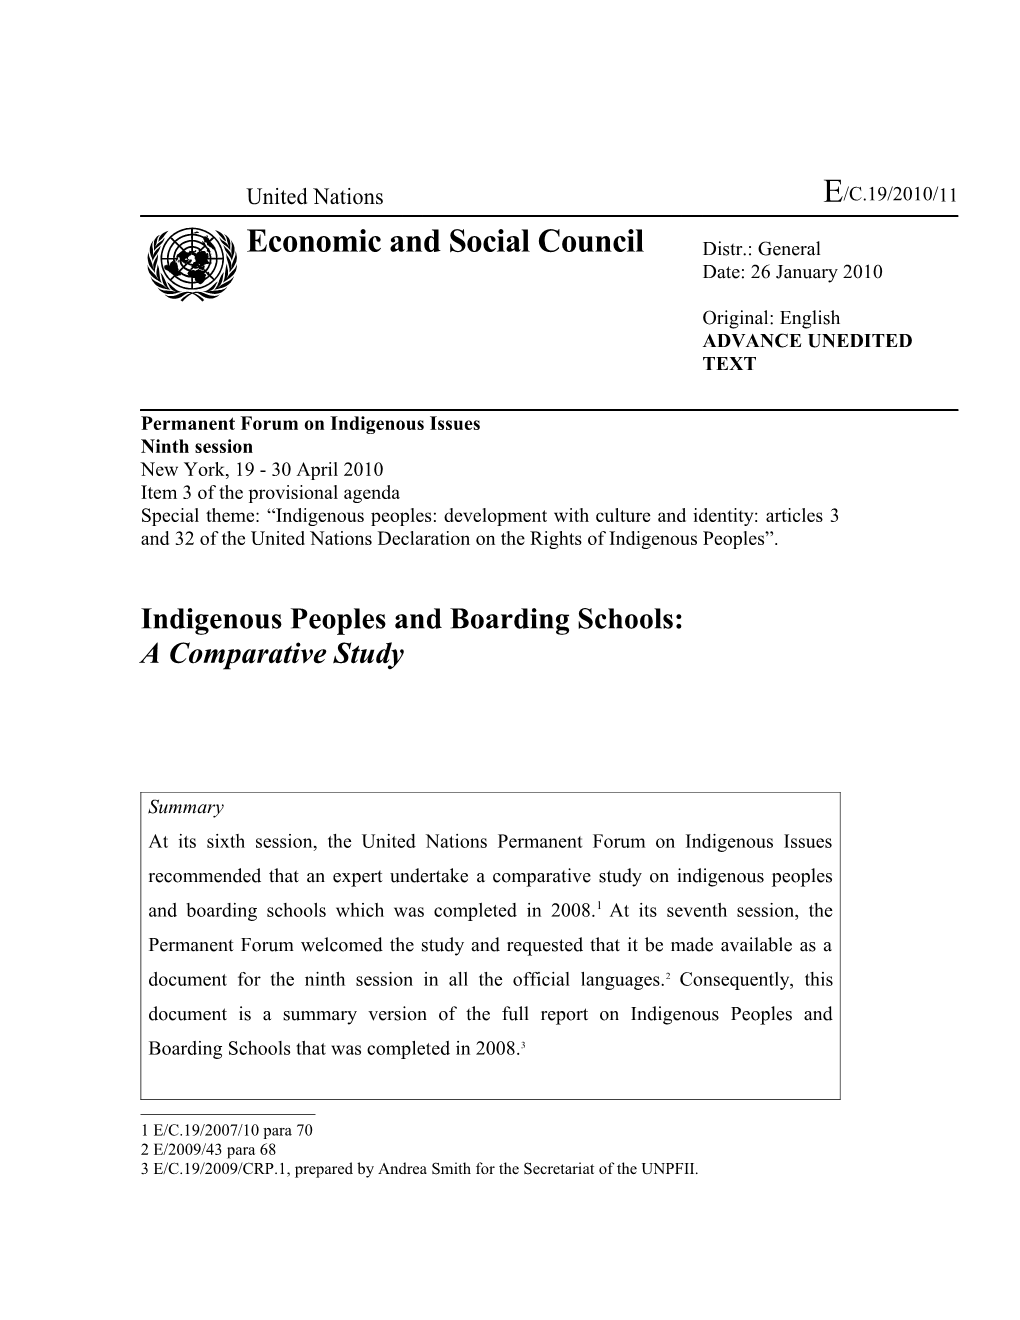 Indigenous Peoples and Boarding Schools